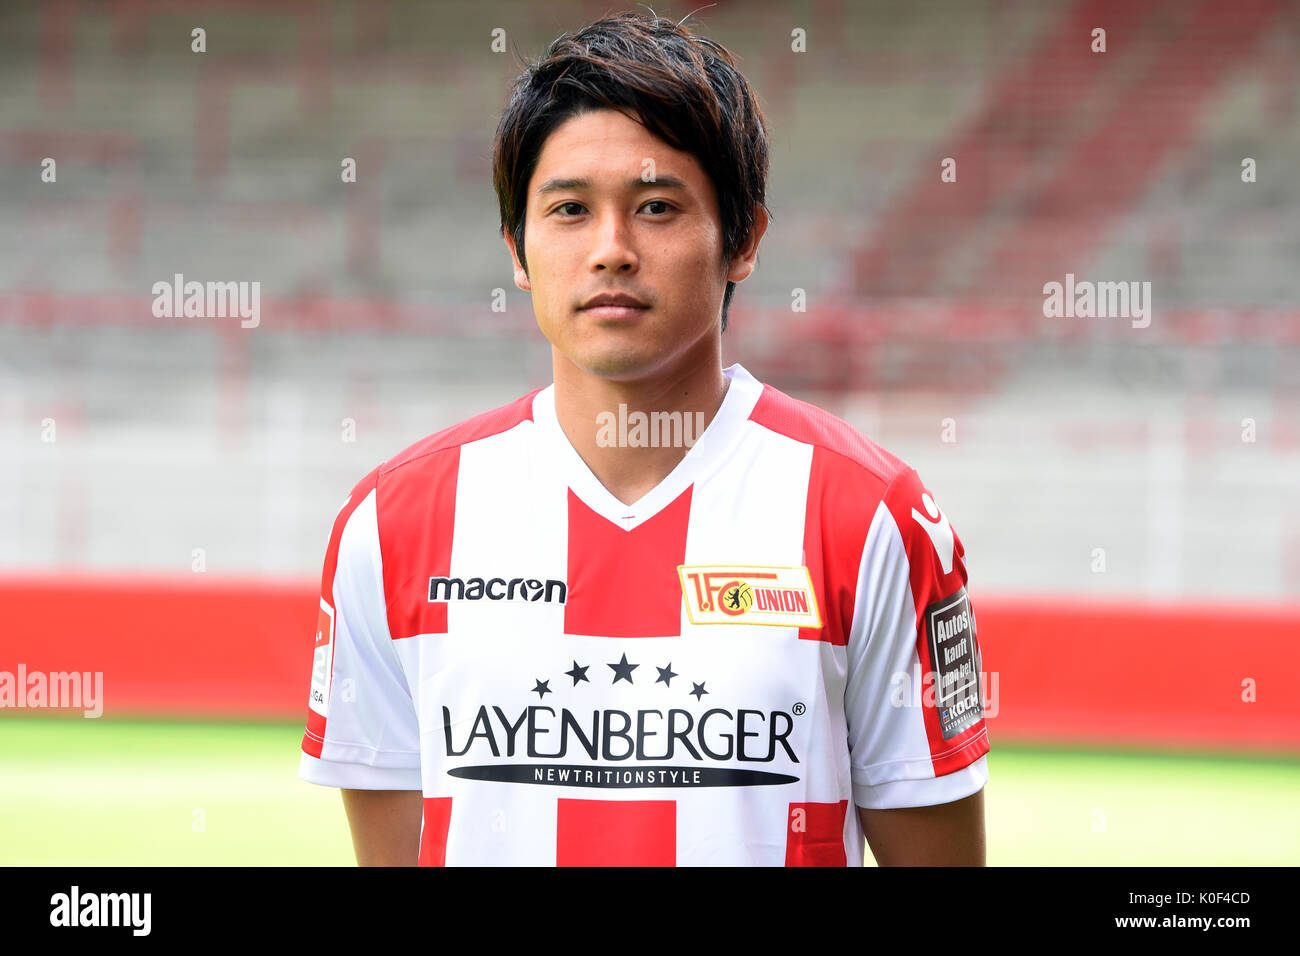 Japanese soccer player Atsuto Uchida being introduced as a new player of  the 1. FC Union Berlin club in Berlin, Germany, 23 August 2017. The  Japanese player switched from Schalke 04 to